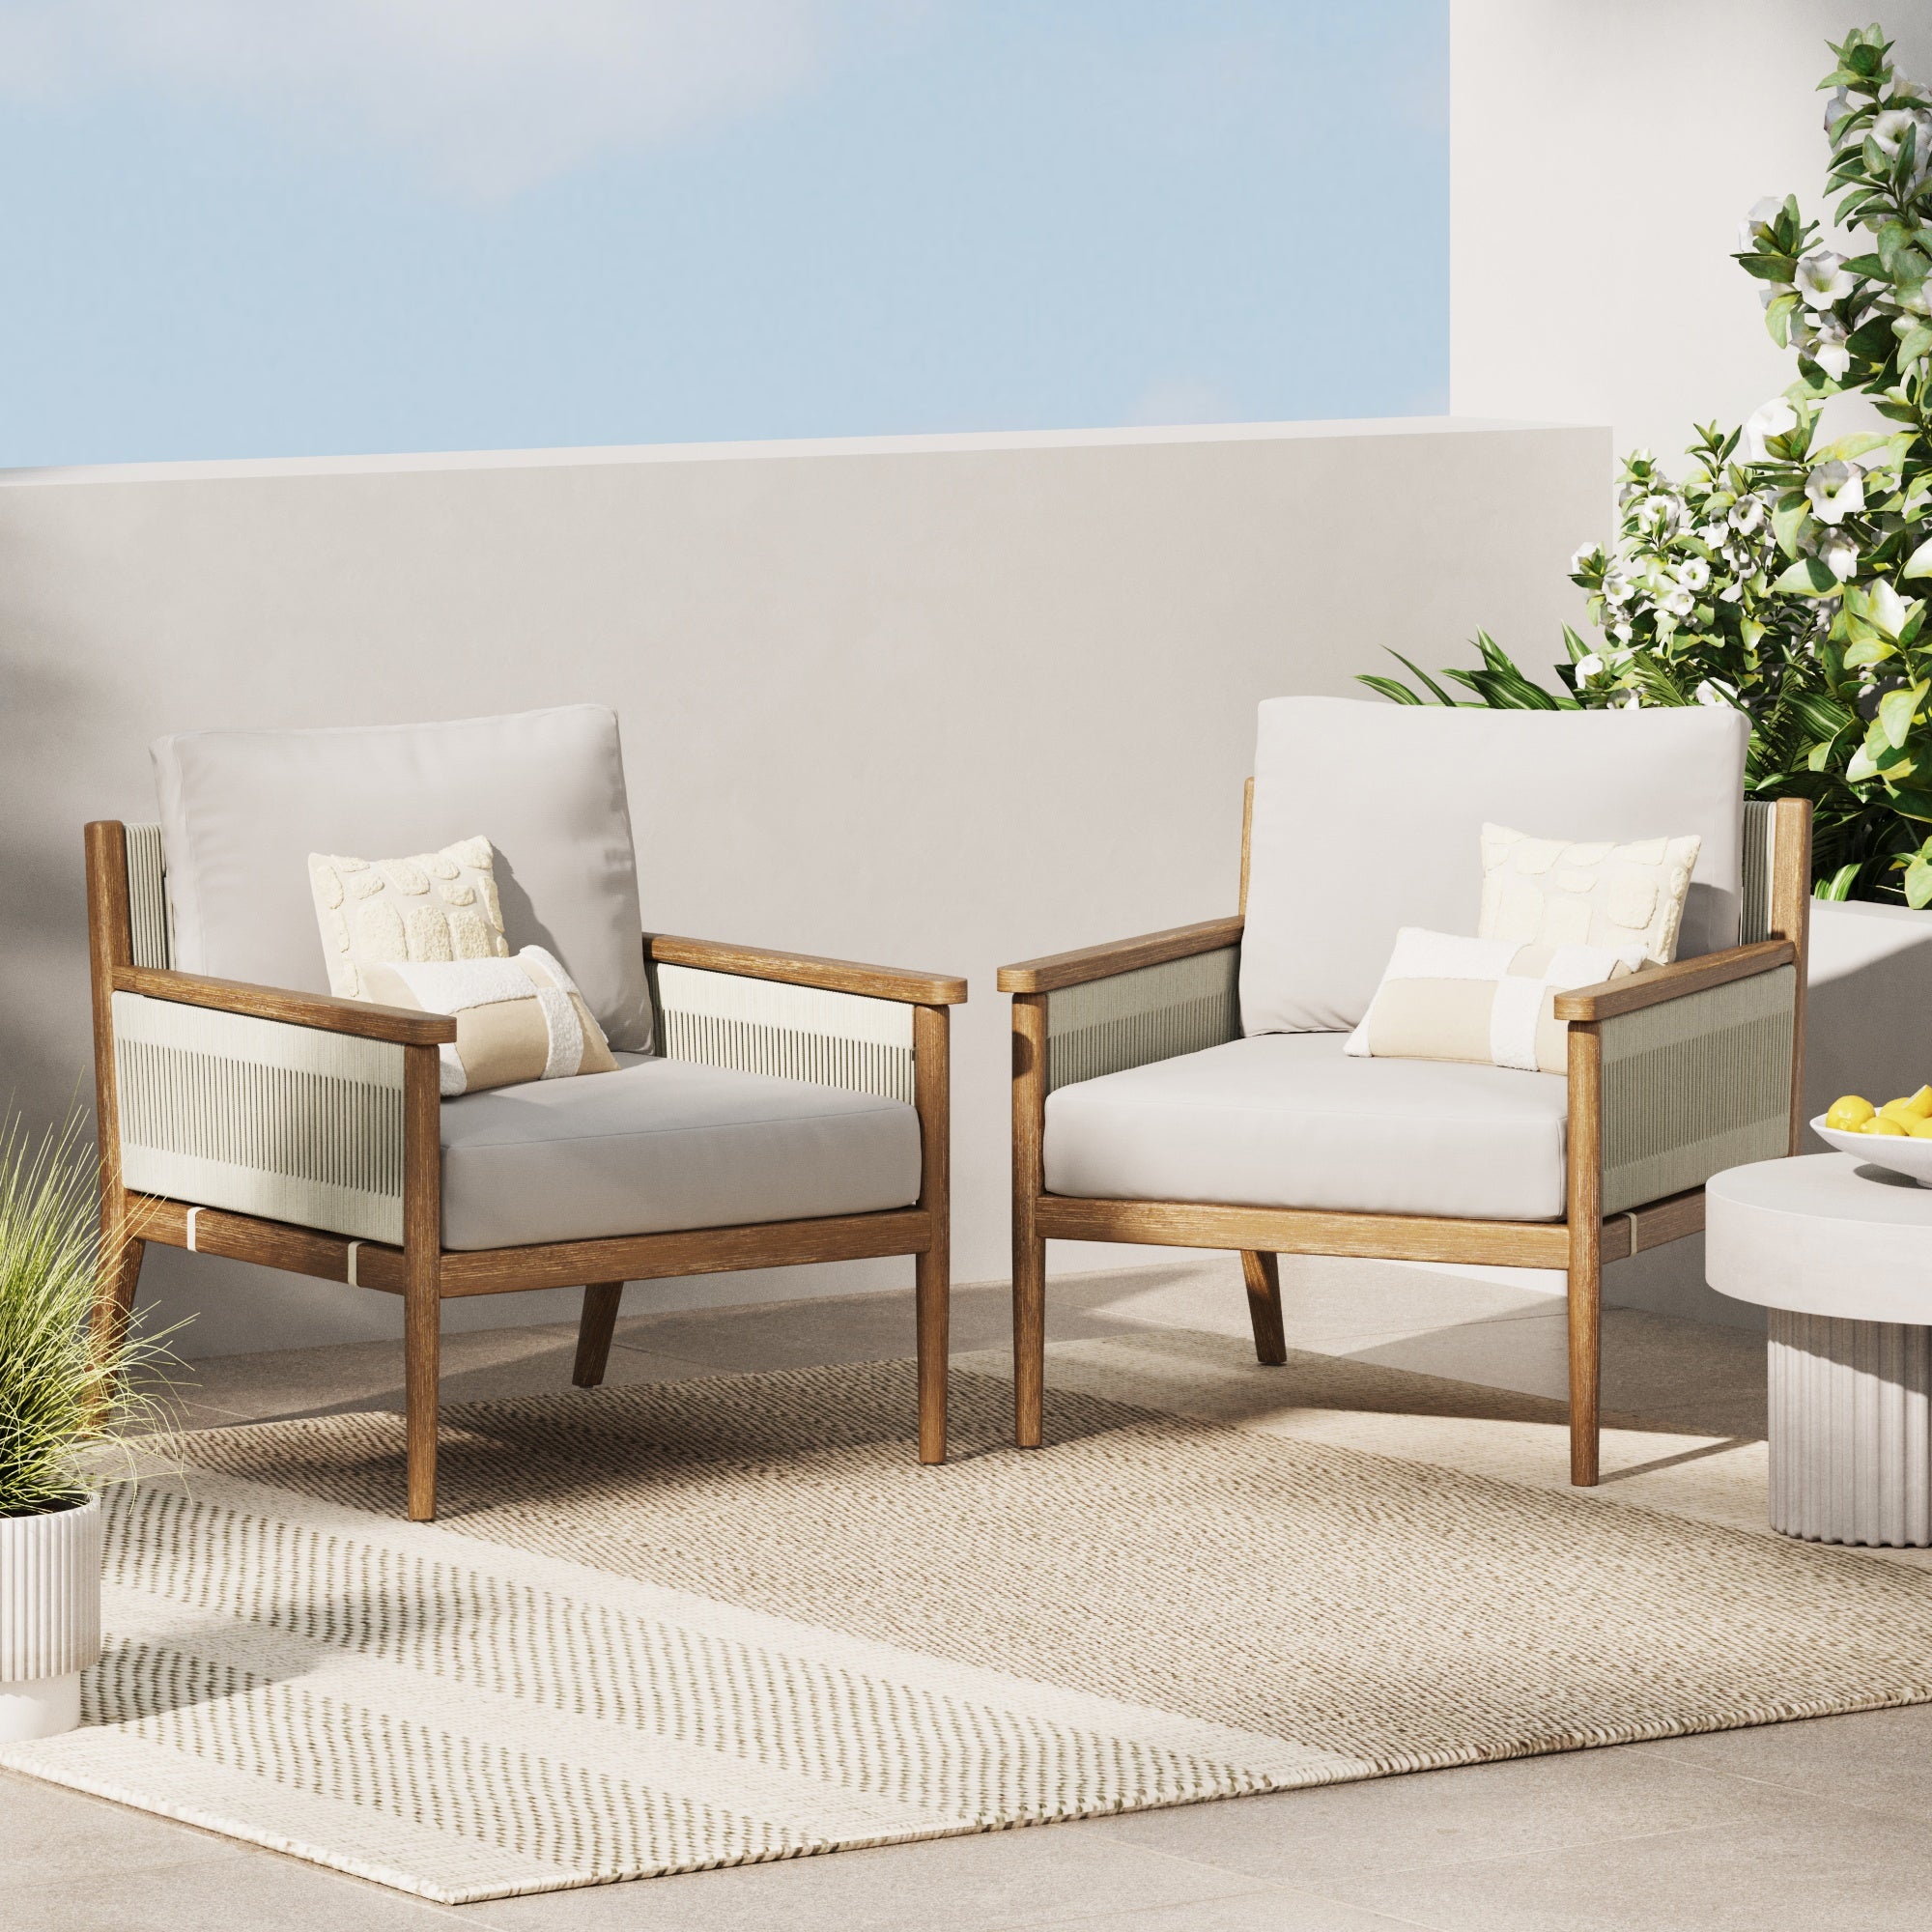 Set of 2 Rope Outdoor Patio Arm Chairs